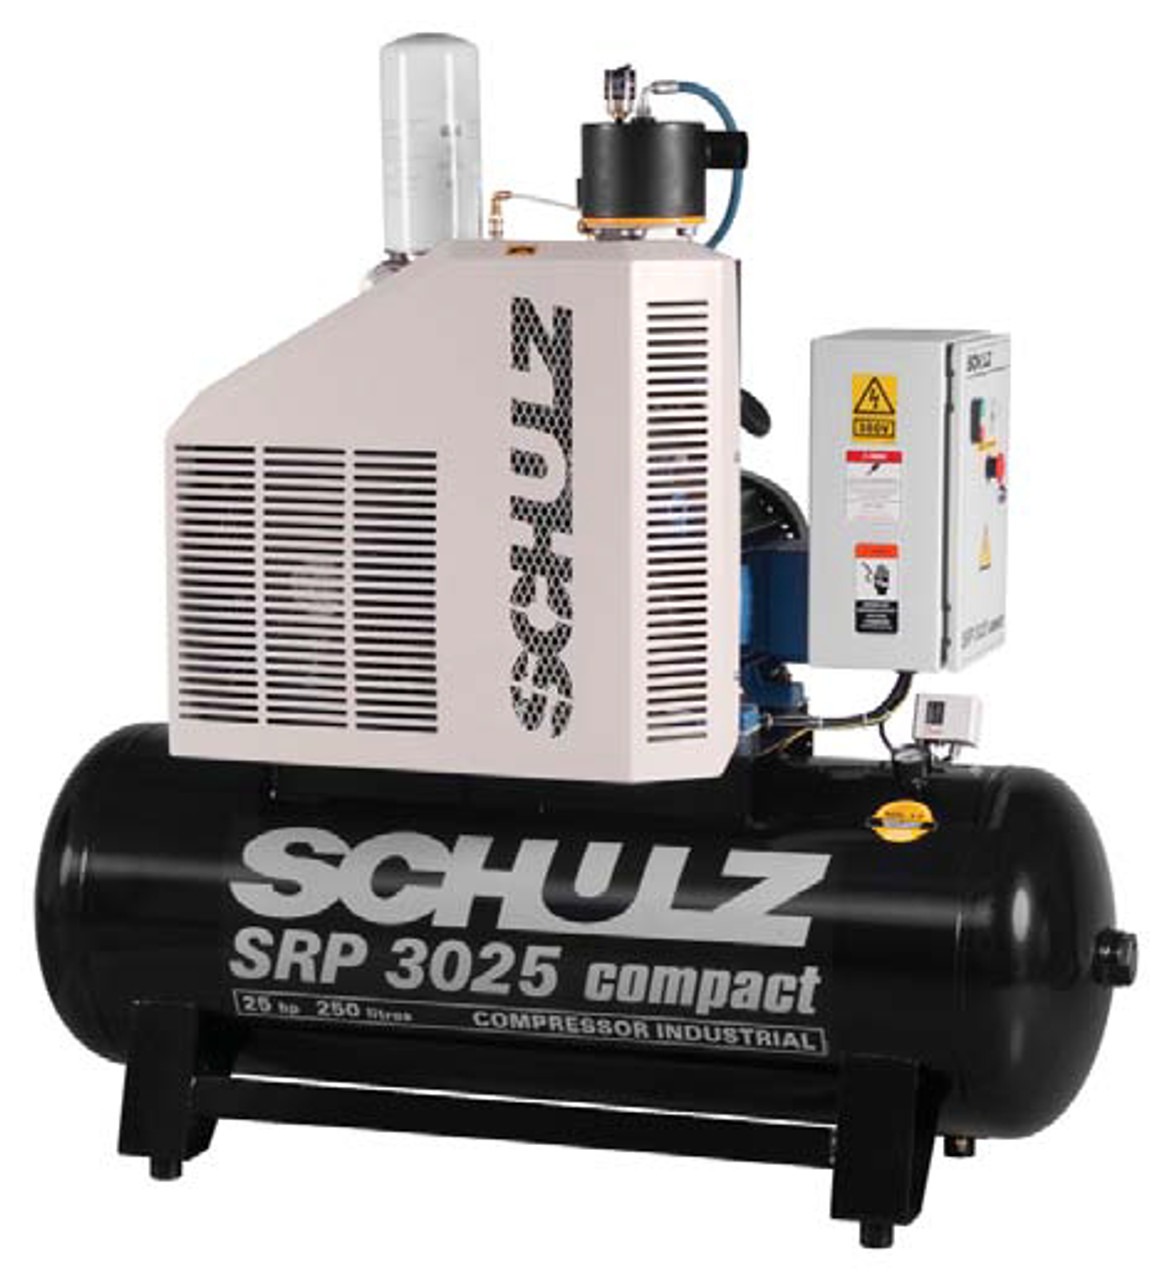 Schulz SRP-3025 Compact 25 HP 3 Phase Rotary Screw Compressor